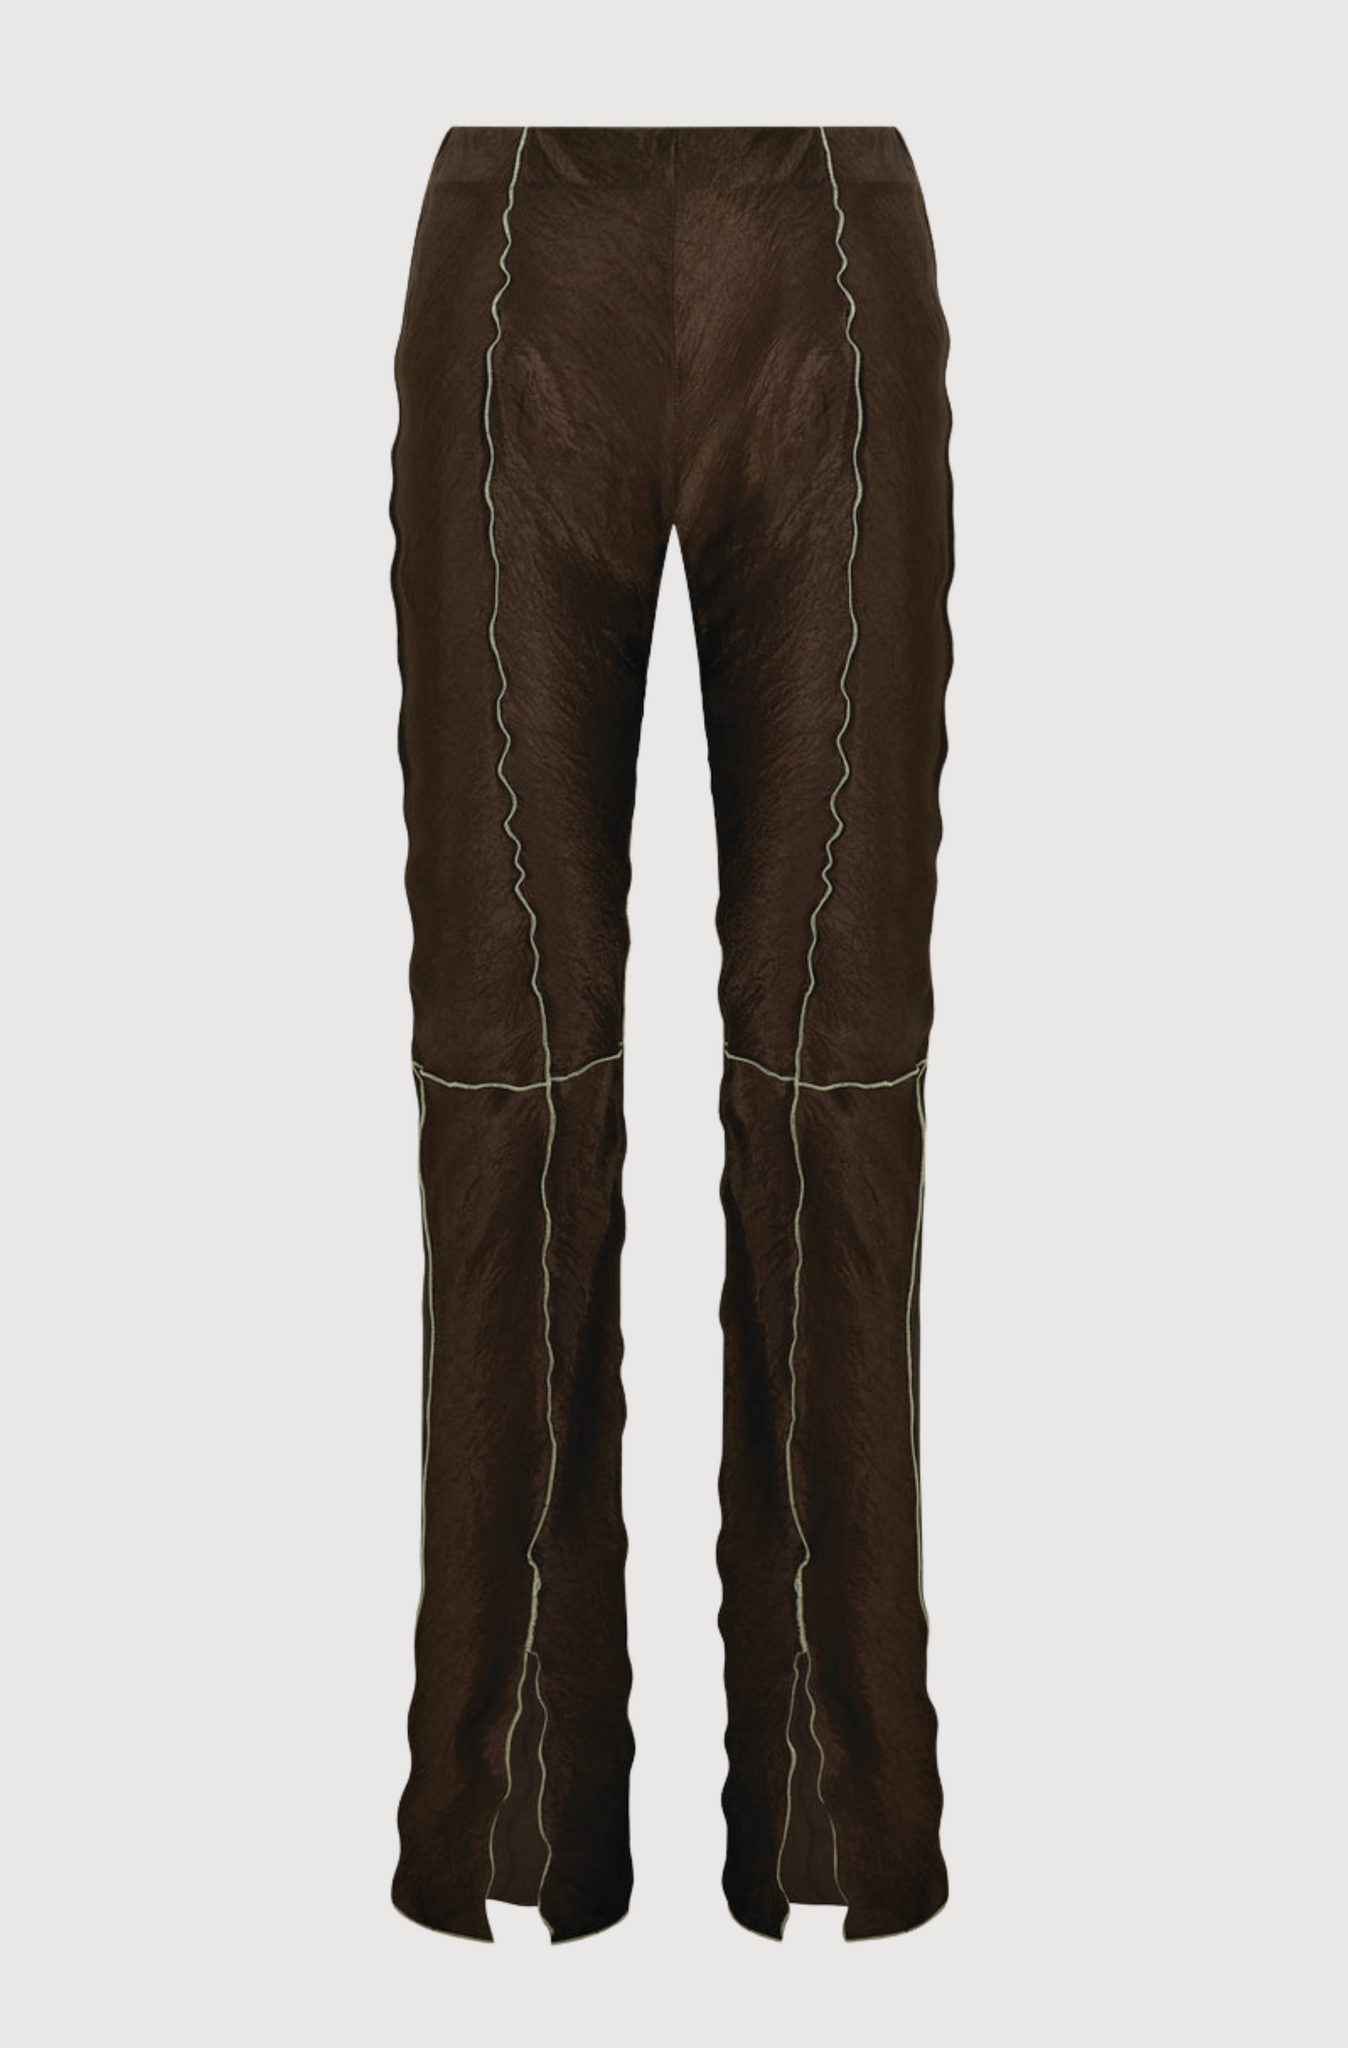 CURLY FRONT SPLIT TROUSERS - CHOCOLATE